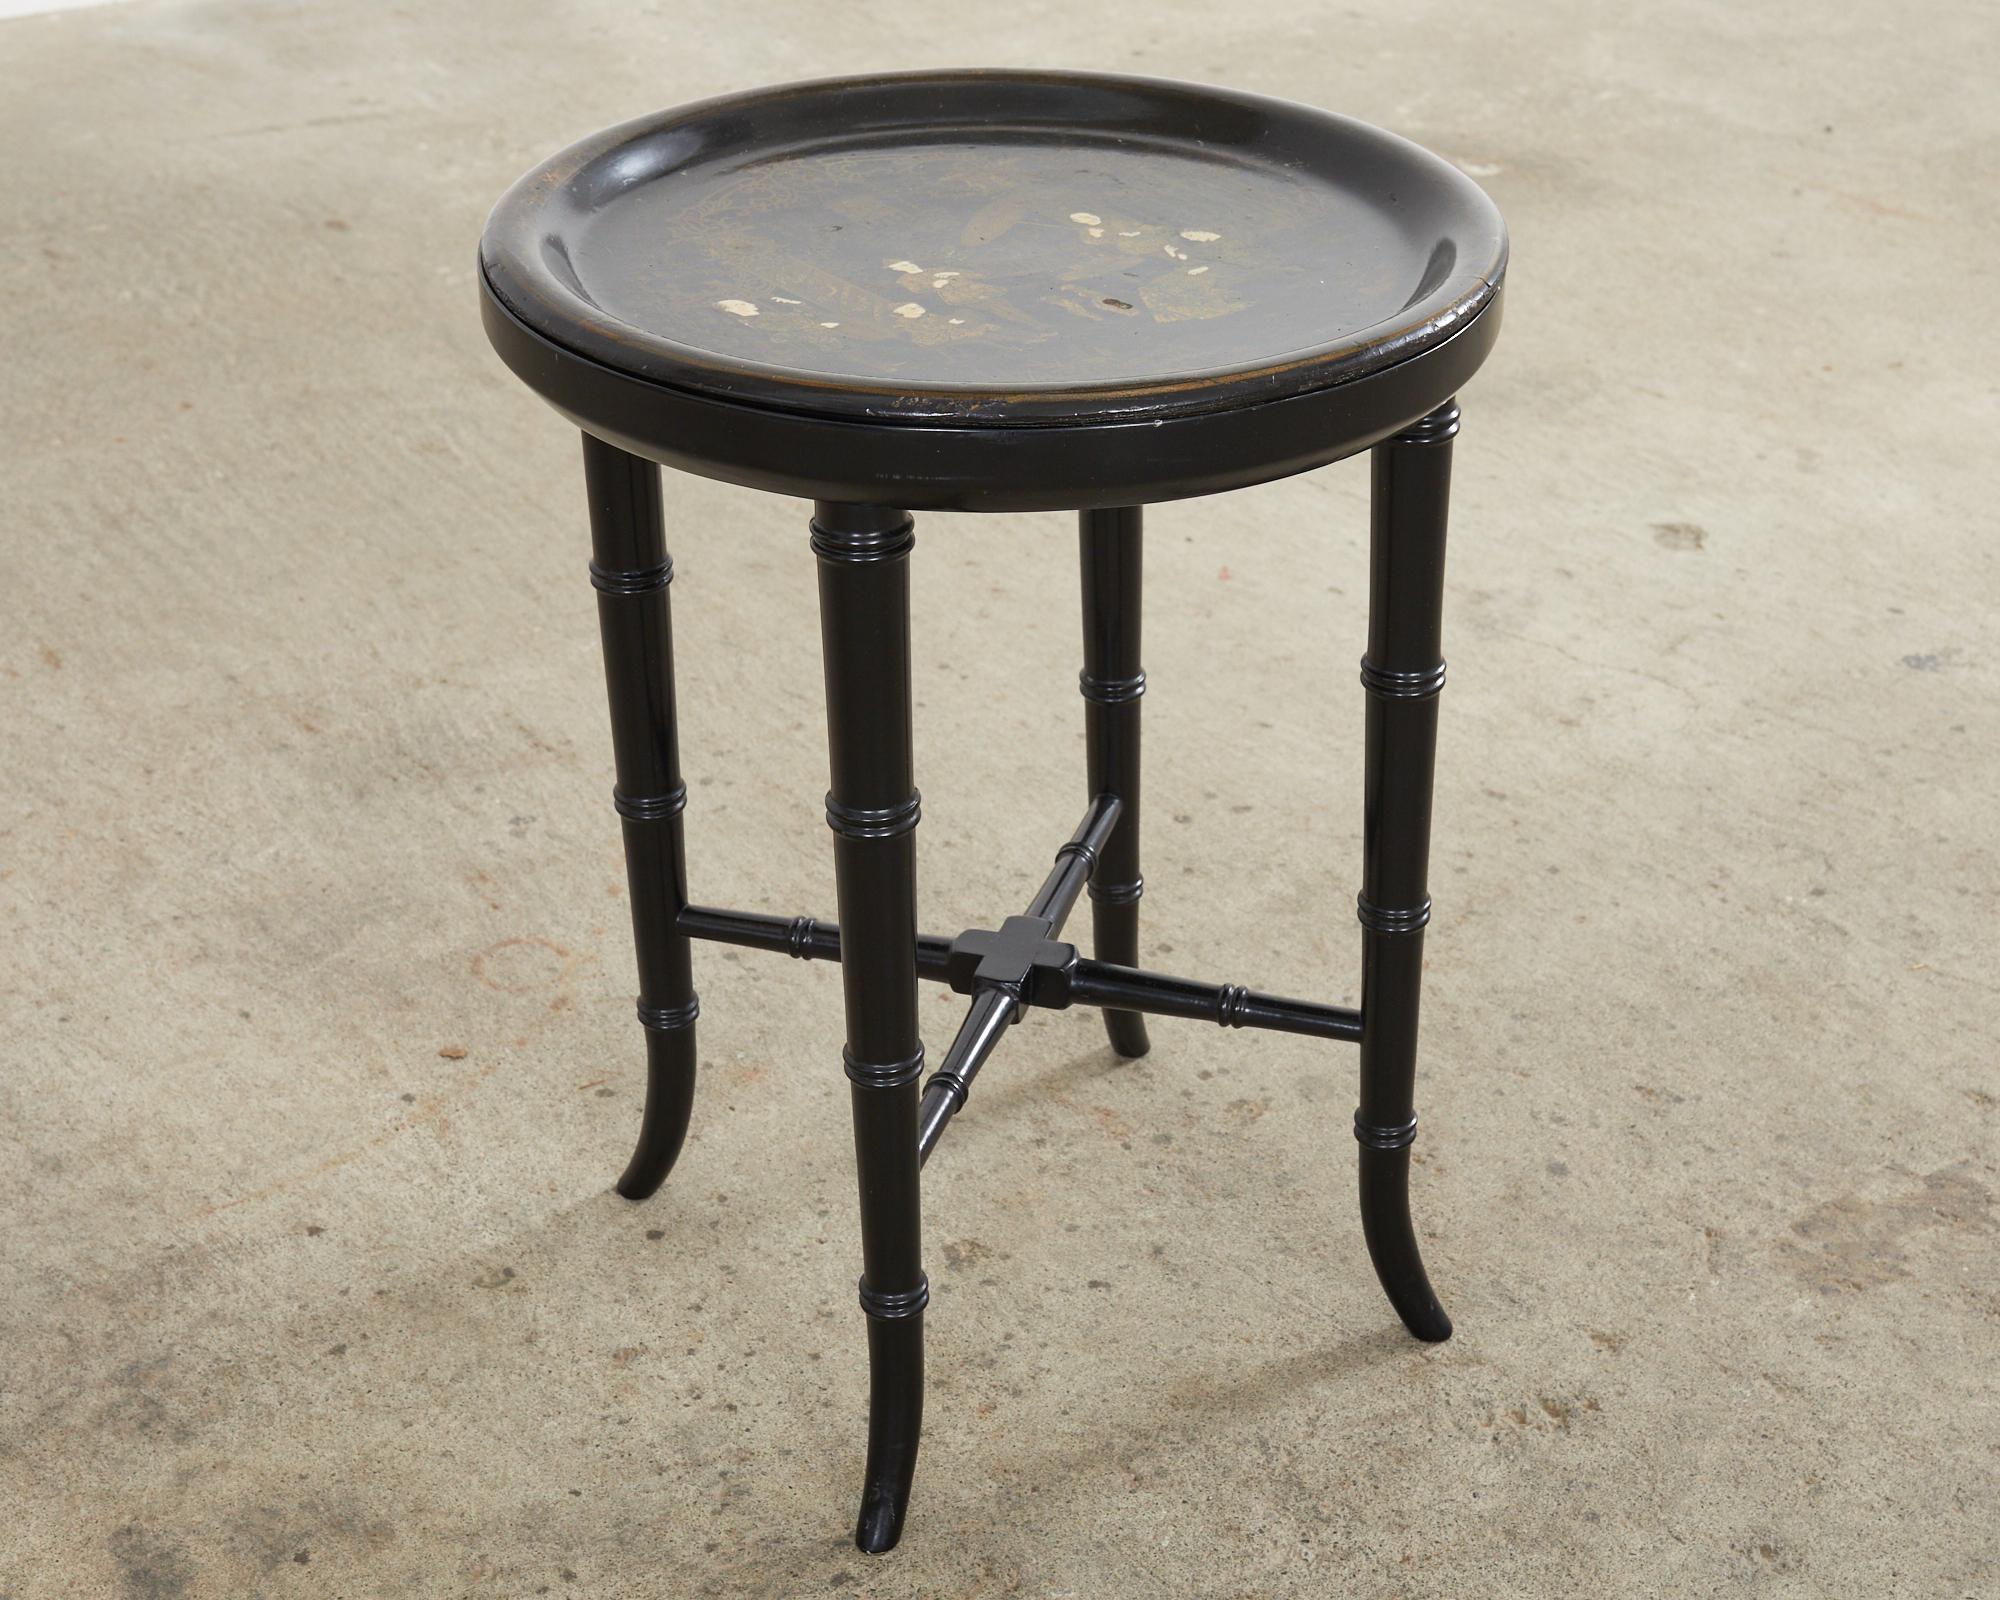 English Chinoiserie Revival Papier Mâché Faux Bamboo Drink Table 1